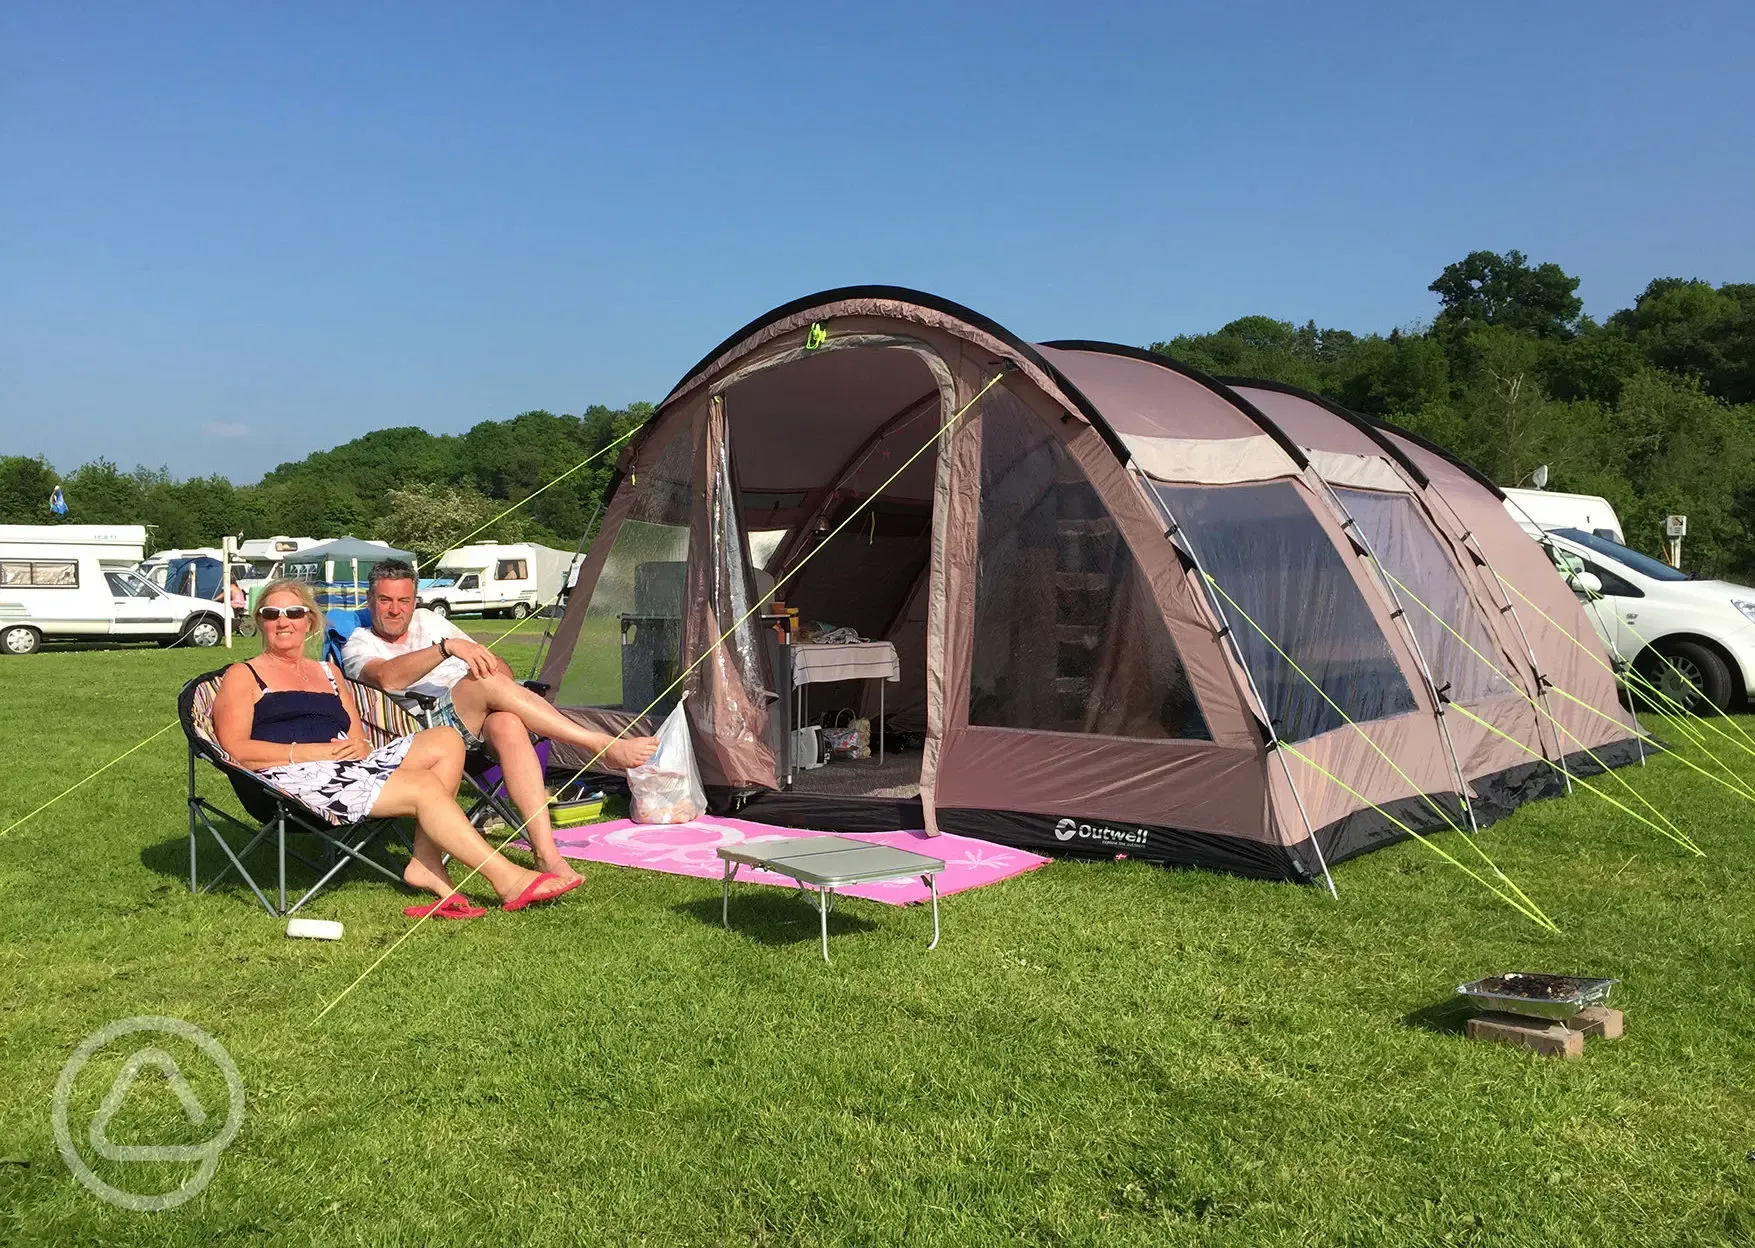 Tent camping at Mill House Caravan Site